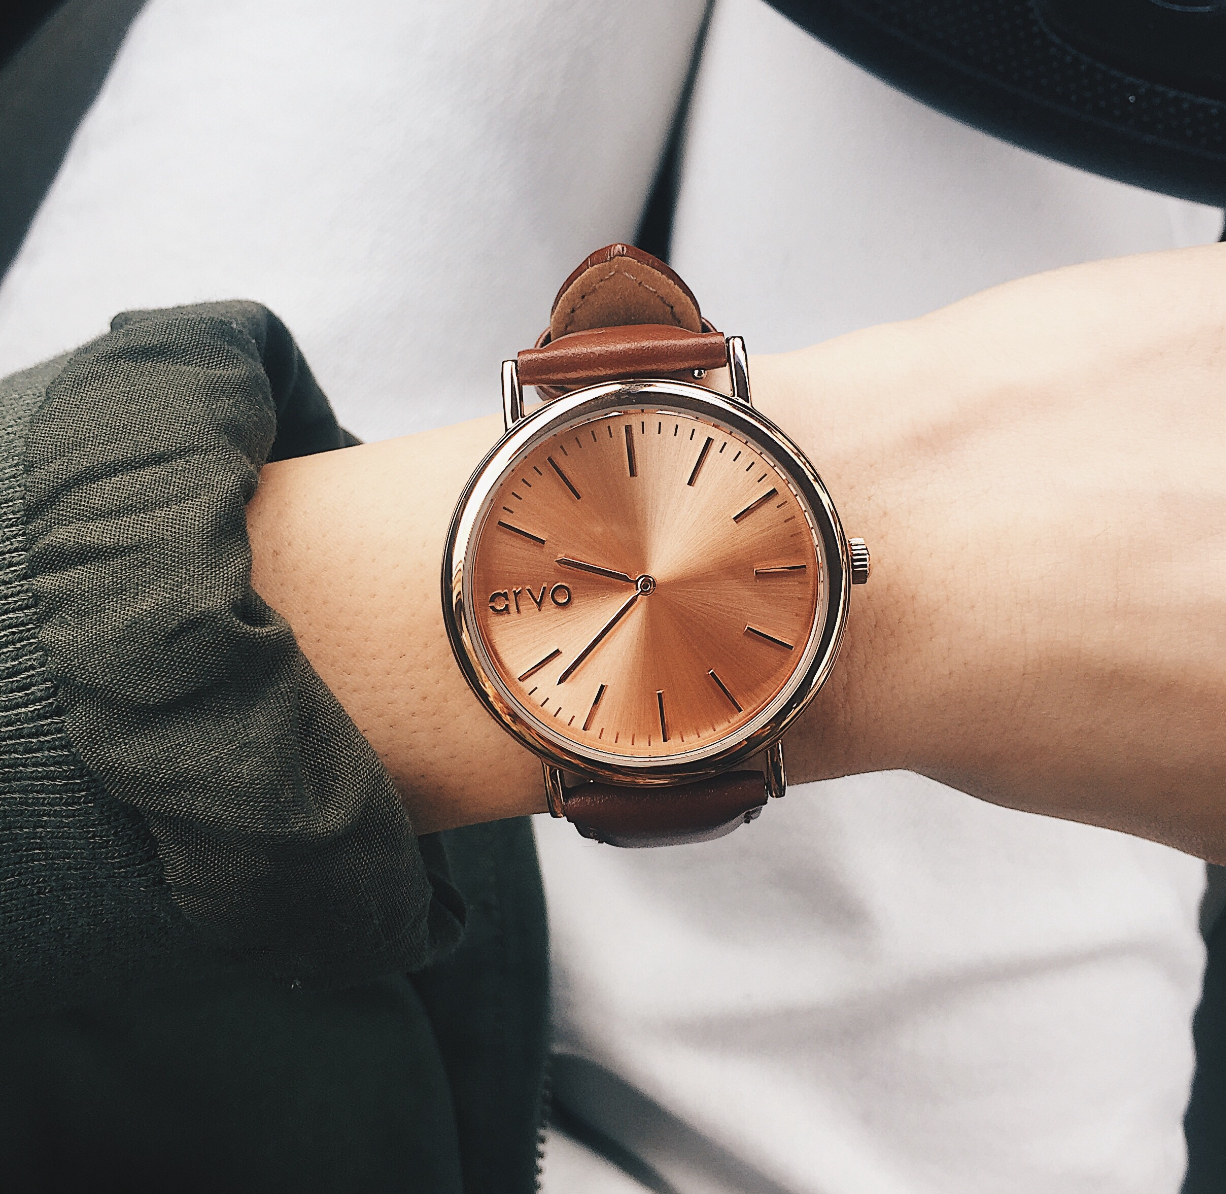 Arvo Rose Time Sawyer Watch for men and women with rose gold dial and rose gold case with a brown stitched leather band on a wrist beside a green blouse sleeve